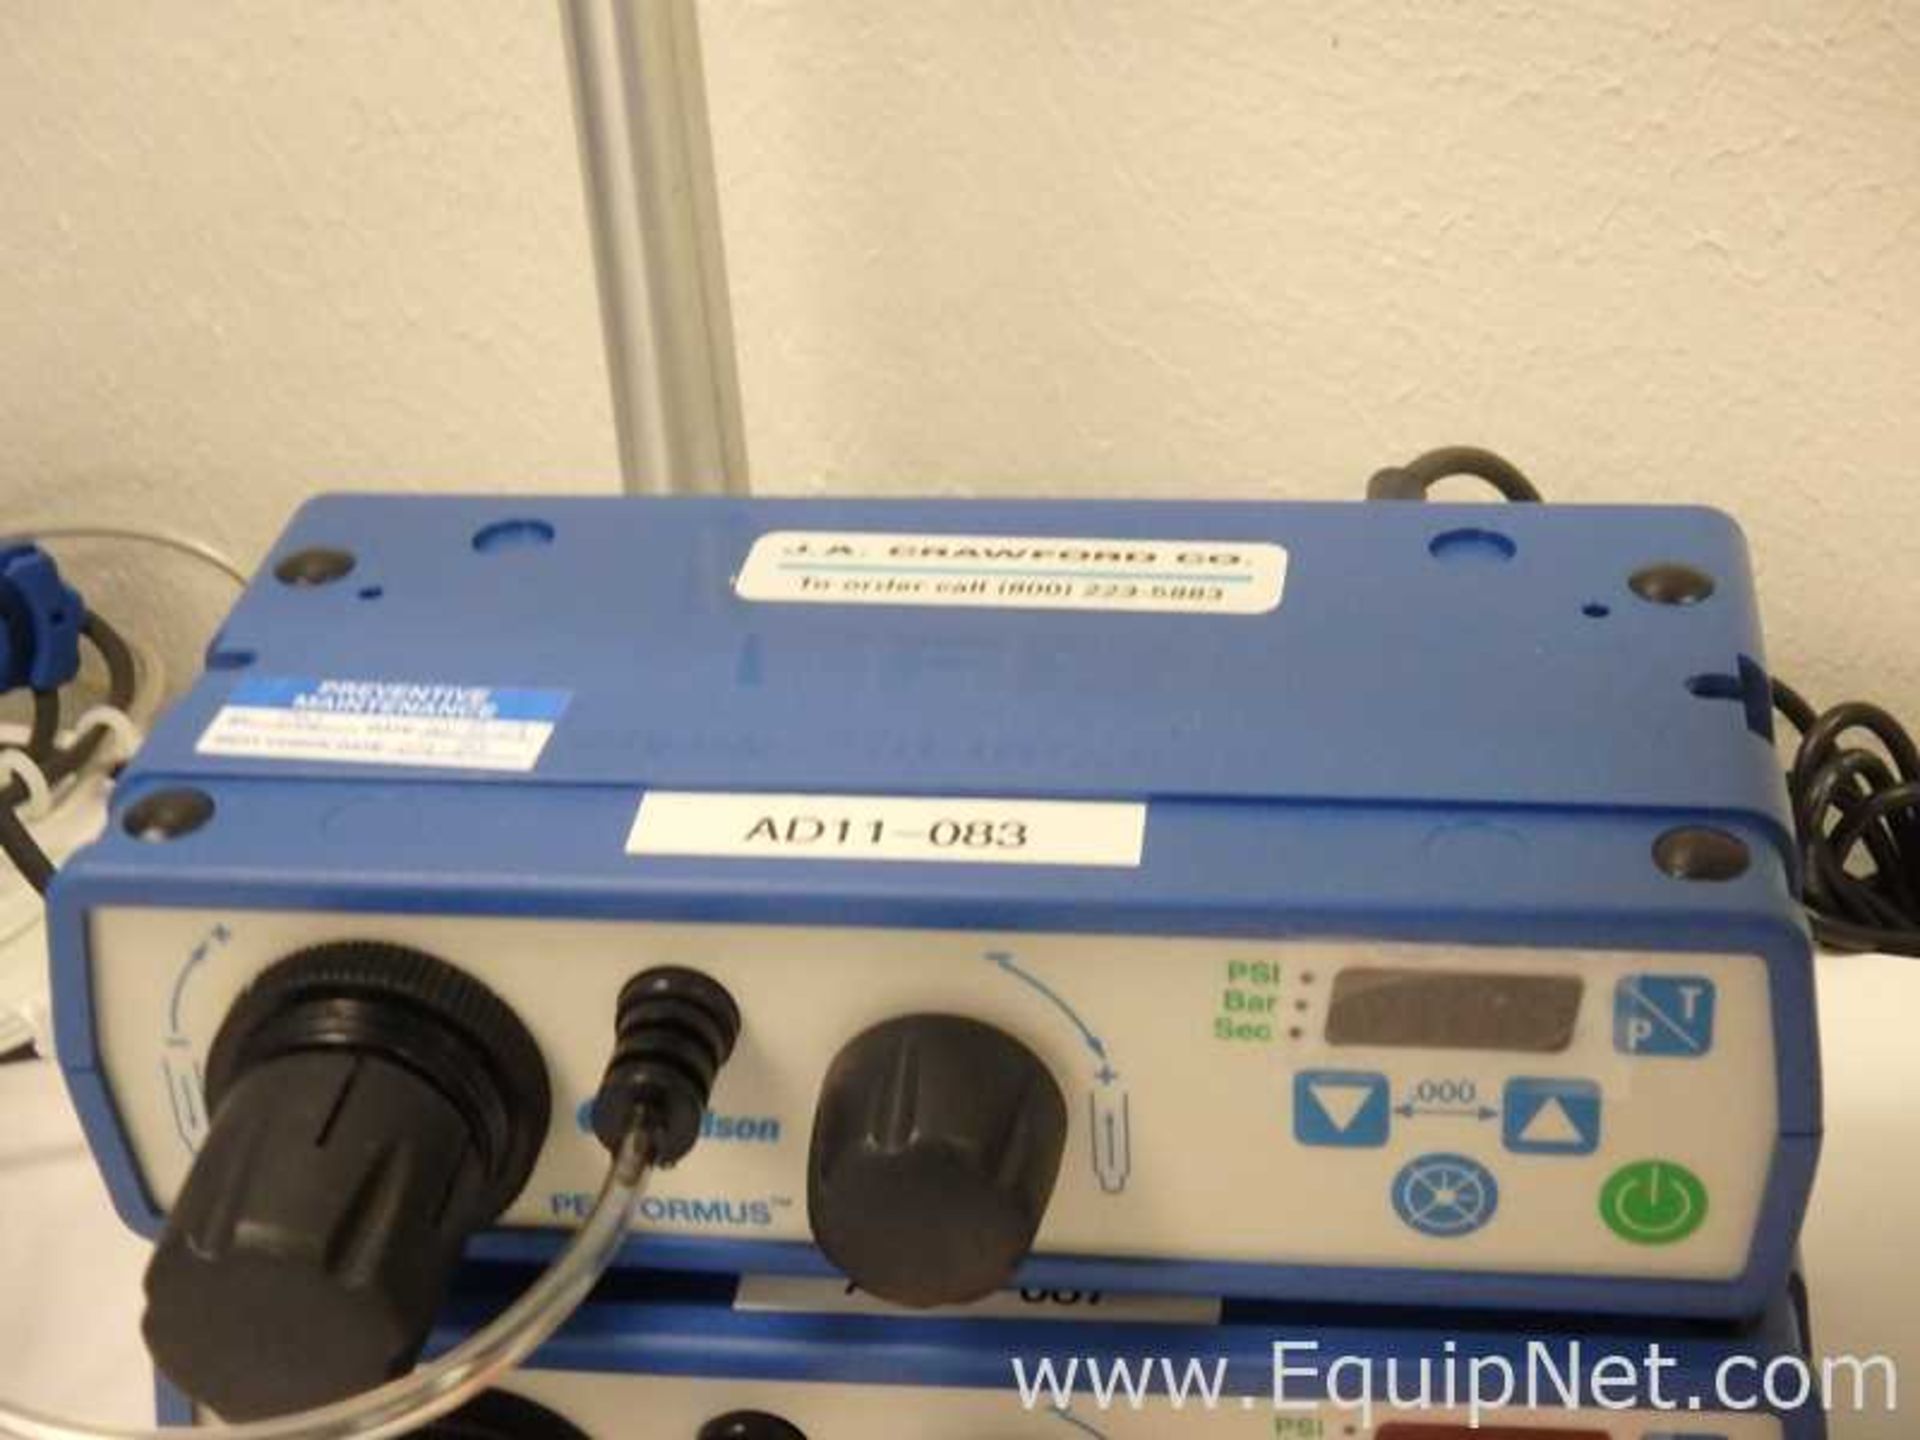 Lot of 4 Nordson EFD Performus III Dispensers - Image 7 of 8